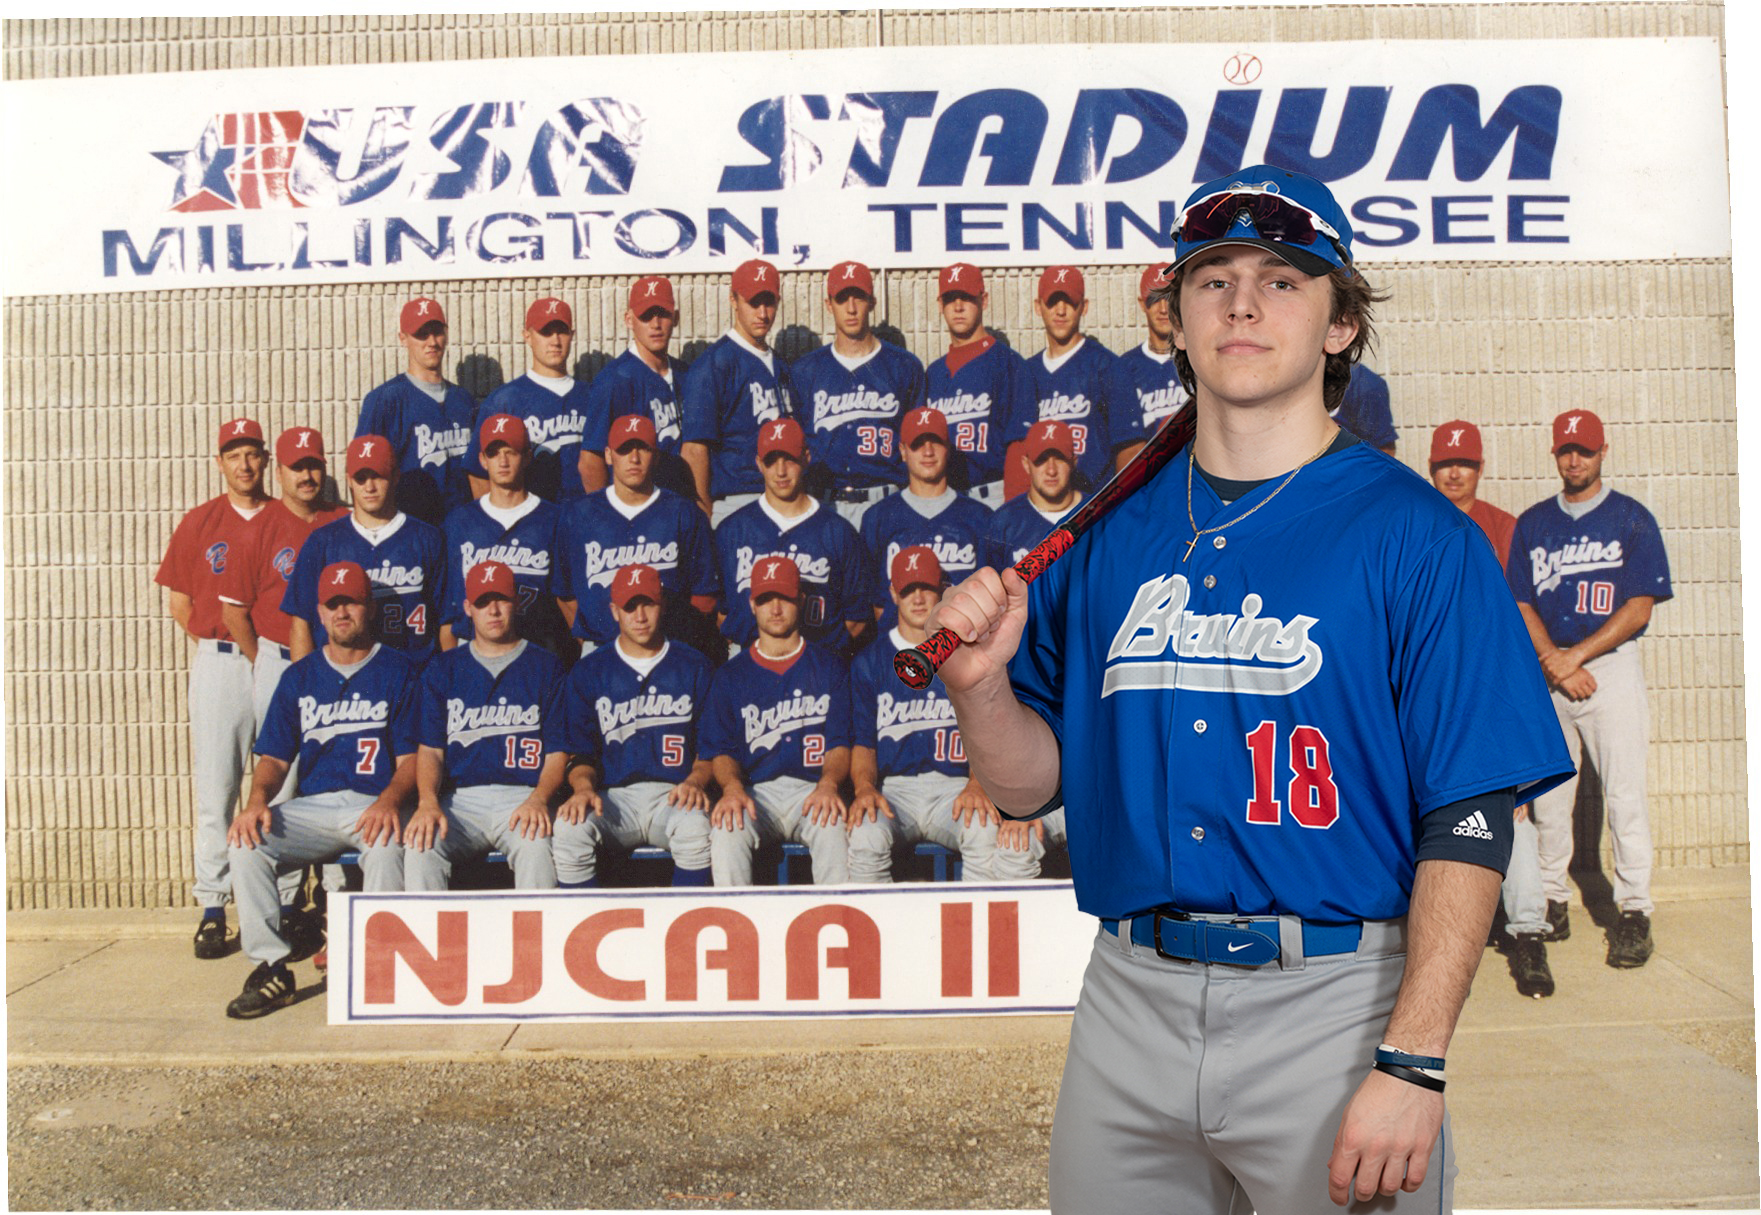 A KCC baseball player stands in front of a photo of the 1999 KCC baseball team.